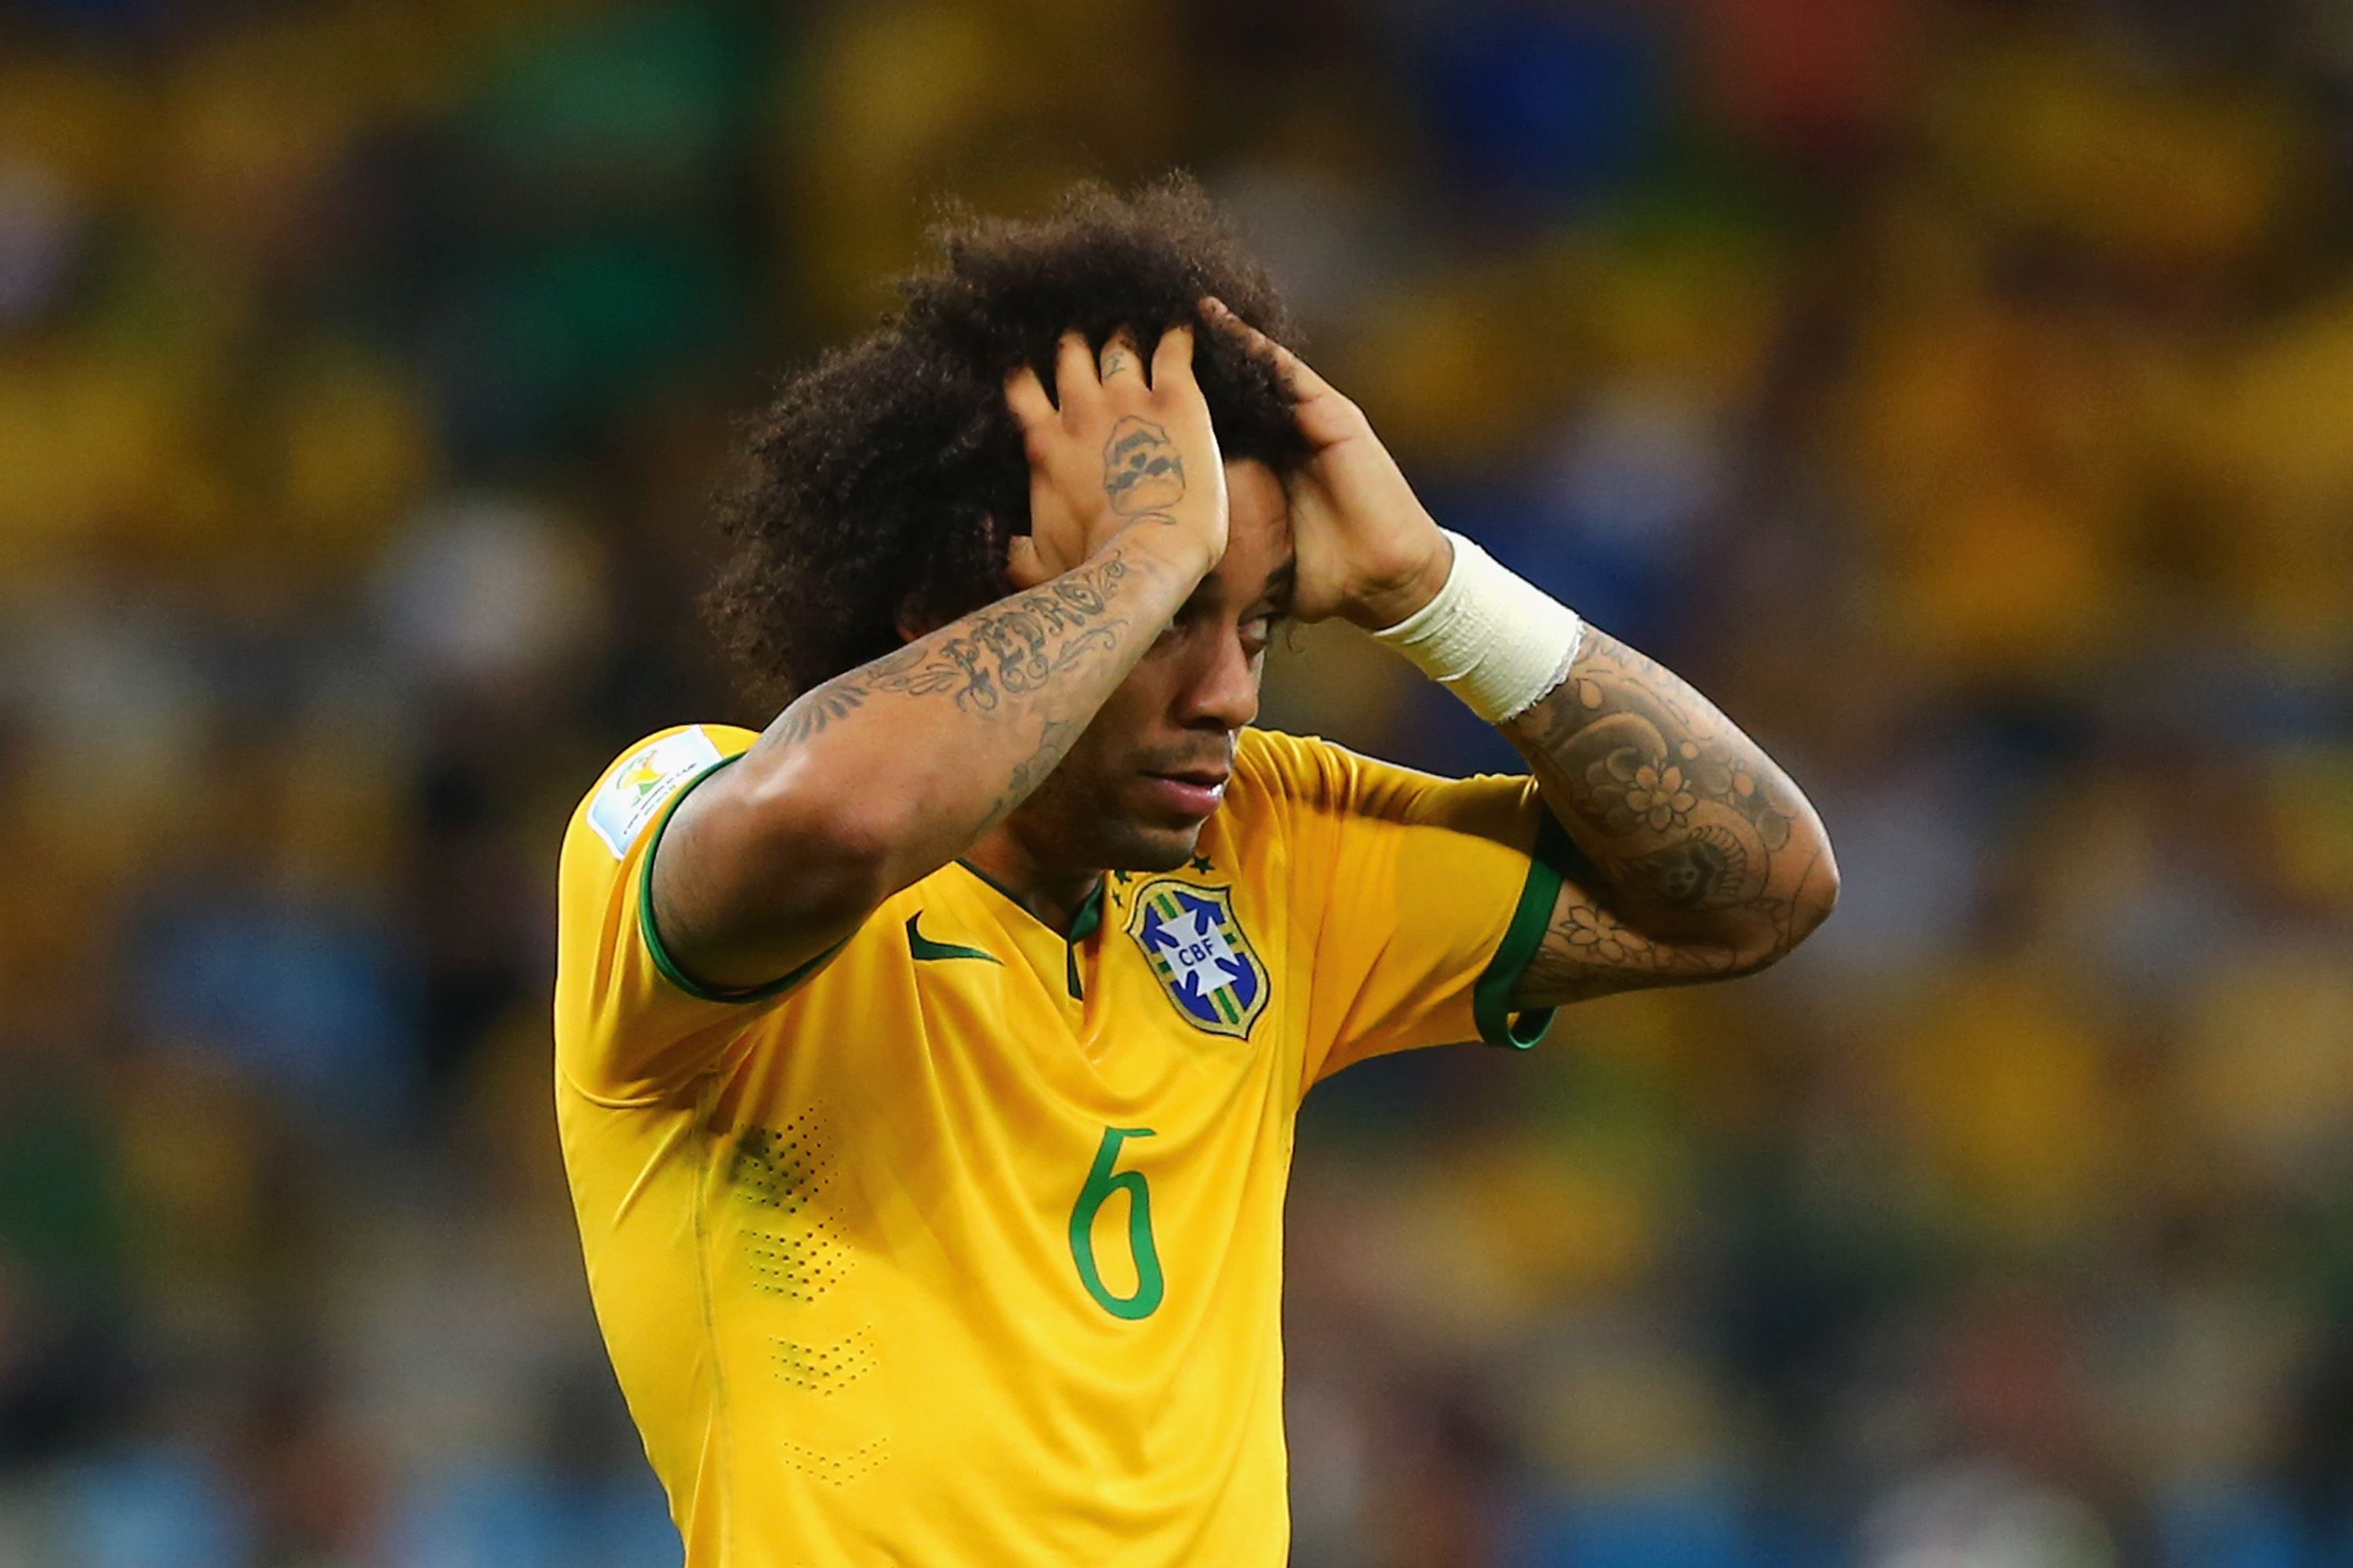 Marcelo's tournament was forgettable